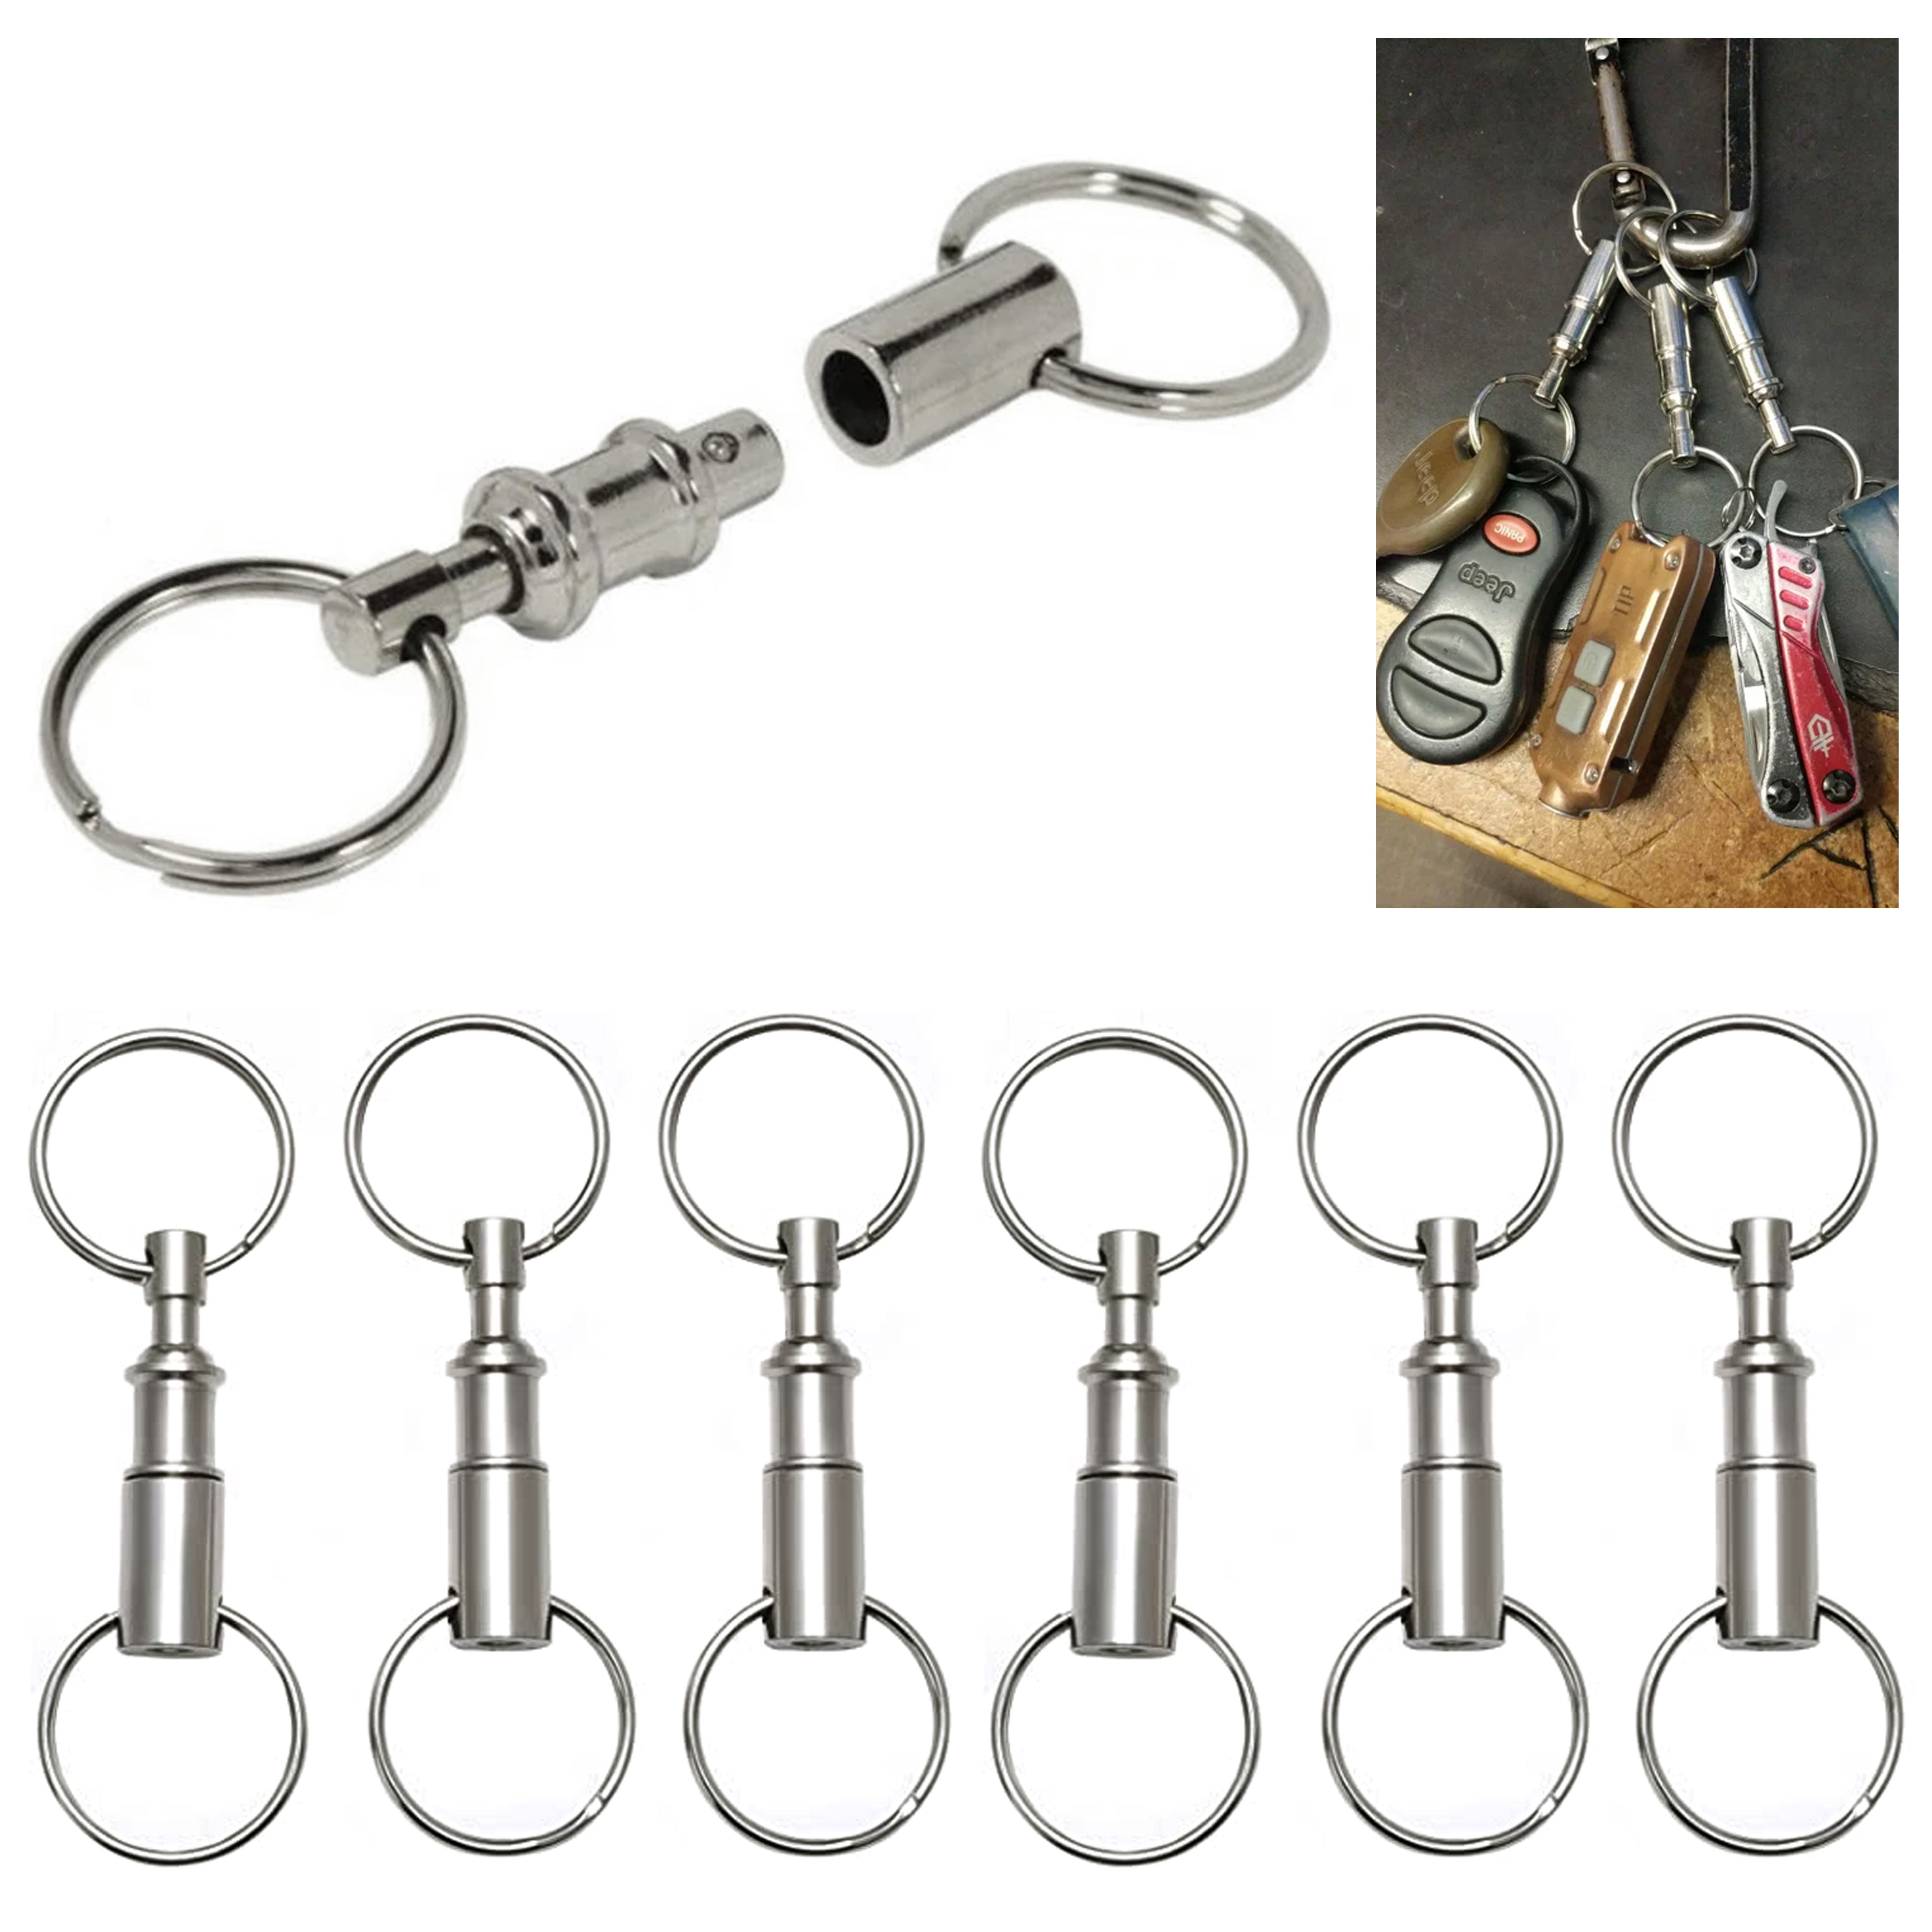 Detachable Keychains Pull Apart Quick Release Removable Key Rings USA Lot of 3 